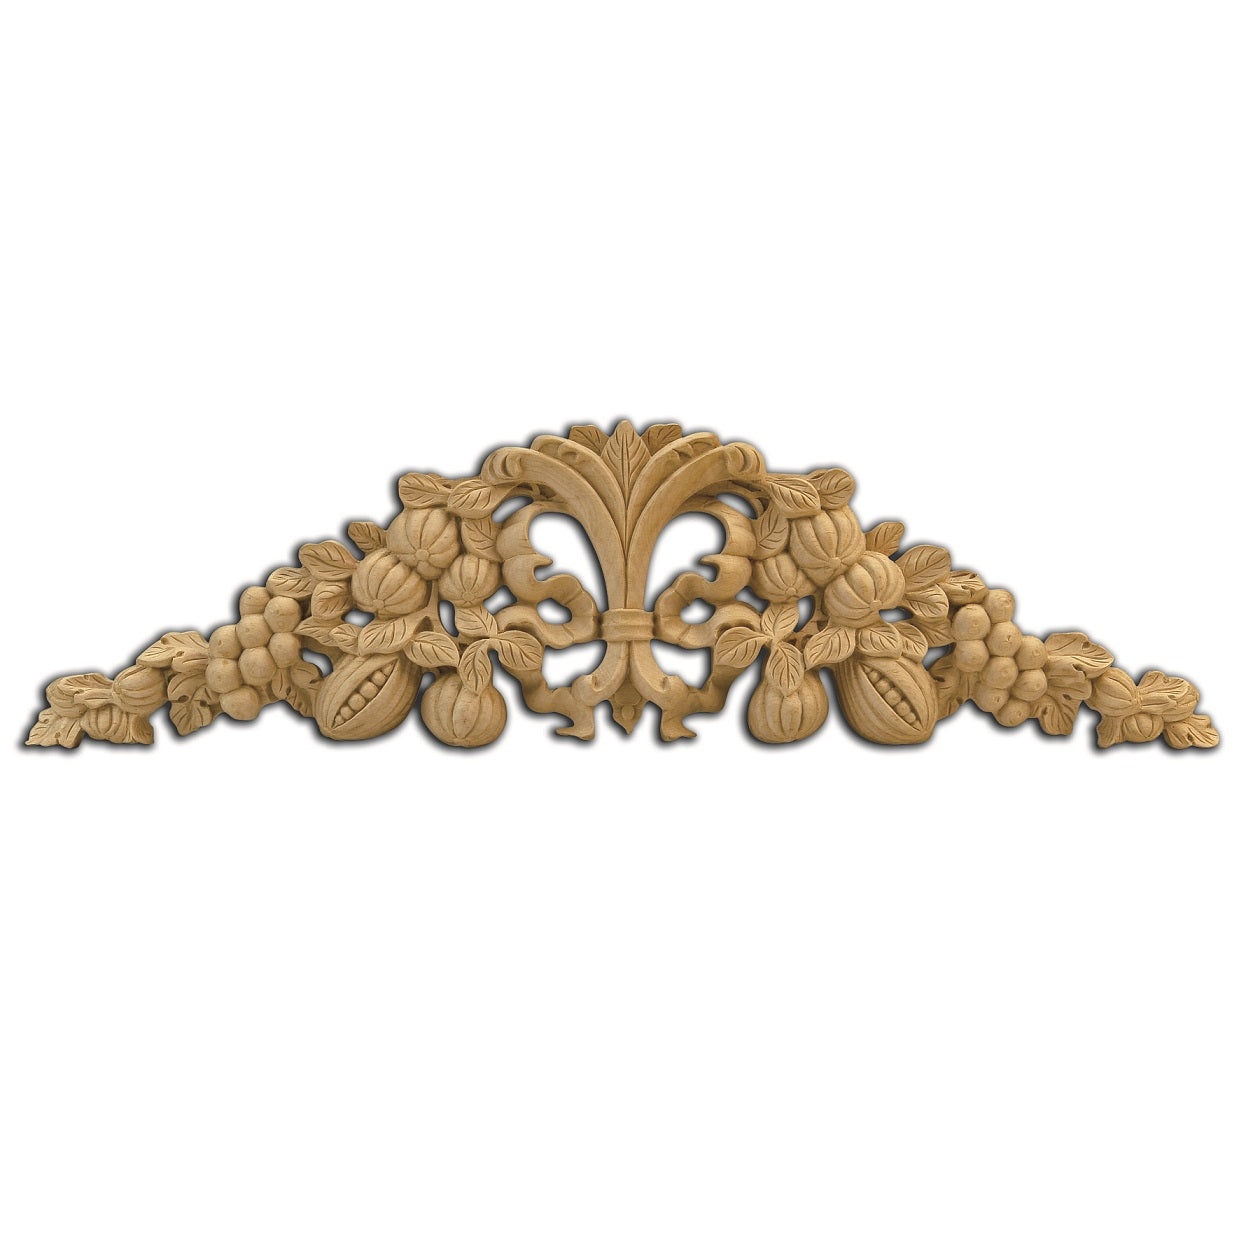 Castlewood SY-CF-3050 Grapevine Overlay